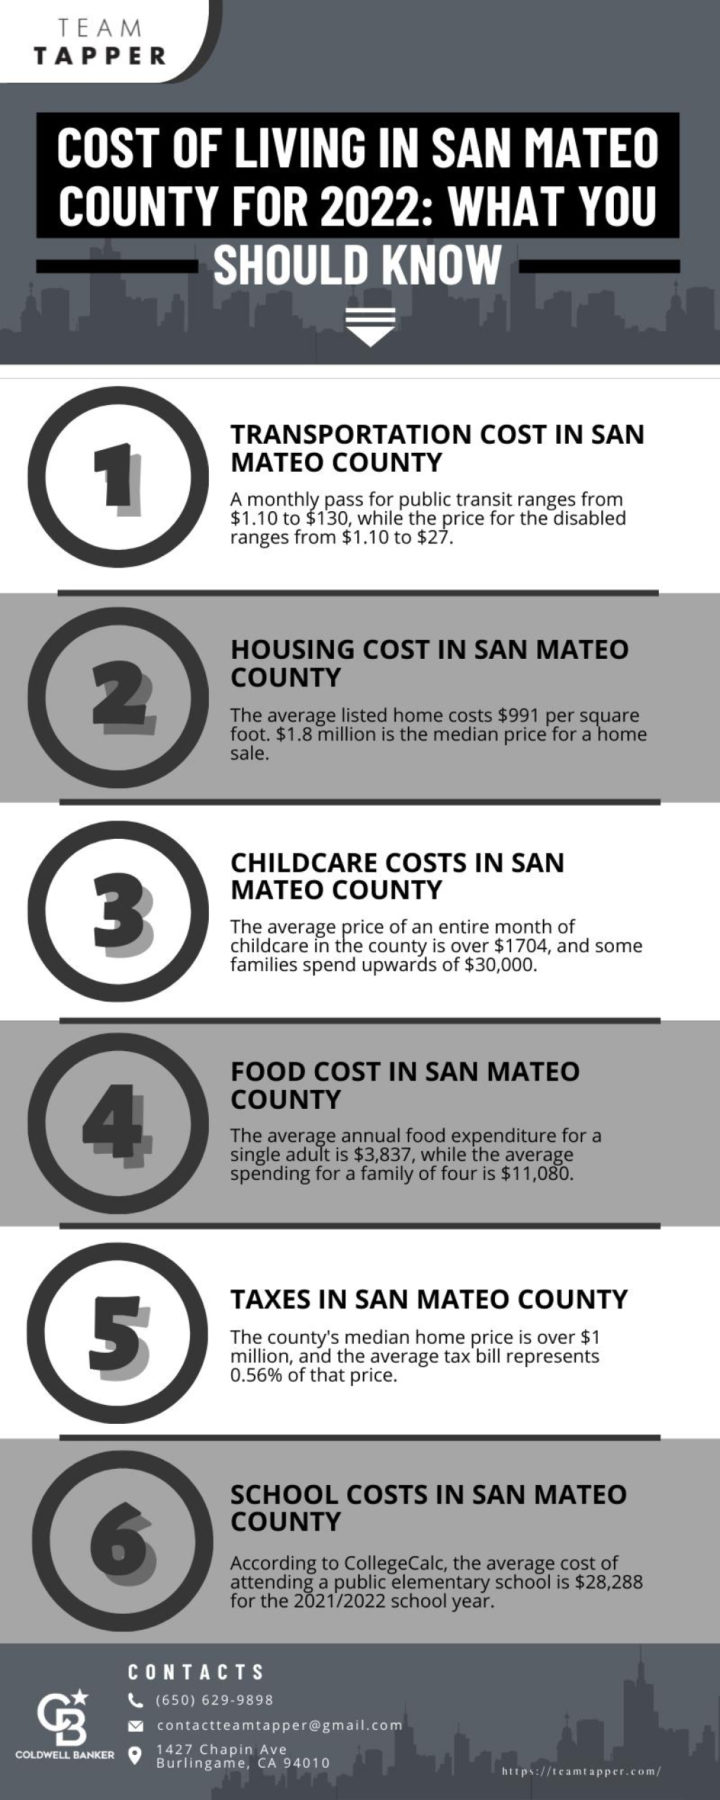 Cost of Living in San Mateo County